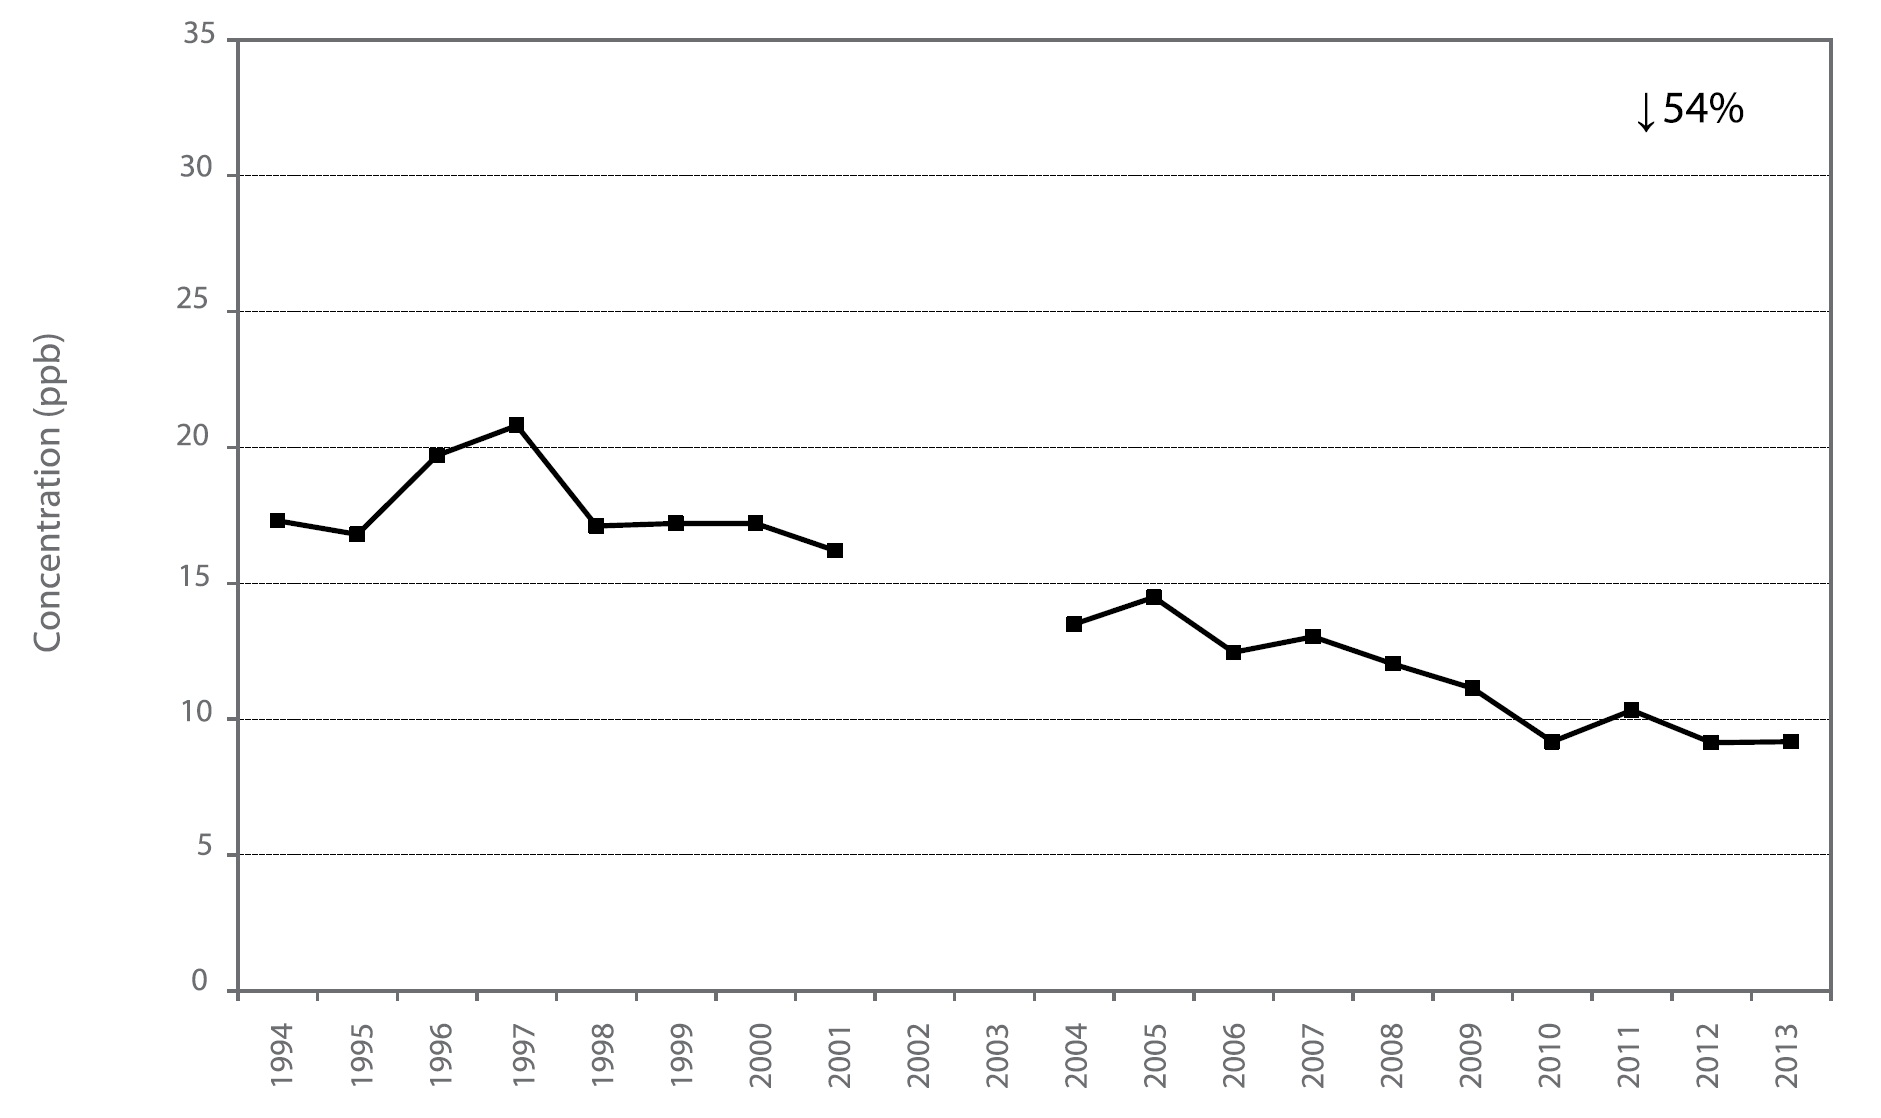 Figure A38 is a line chart displaying the nitrogen dioxide annual mean at Oakville from 1994 to 2013. Over this 20-year period, nitrogen dioxide decreased 54%.